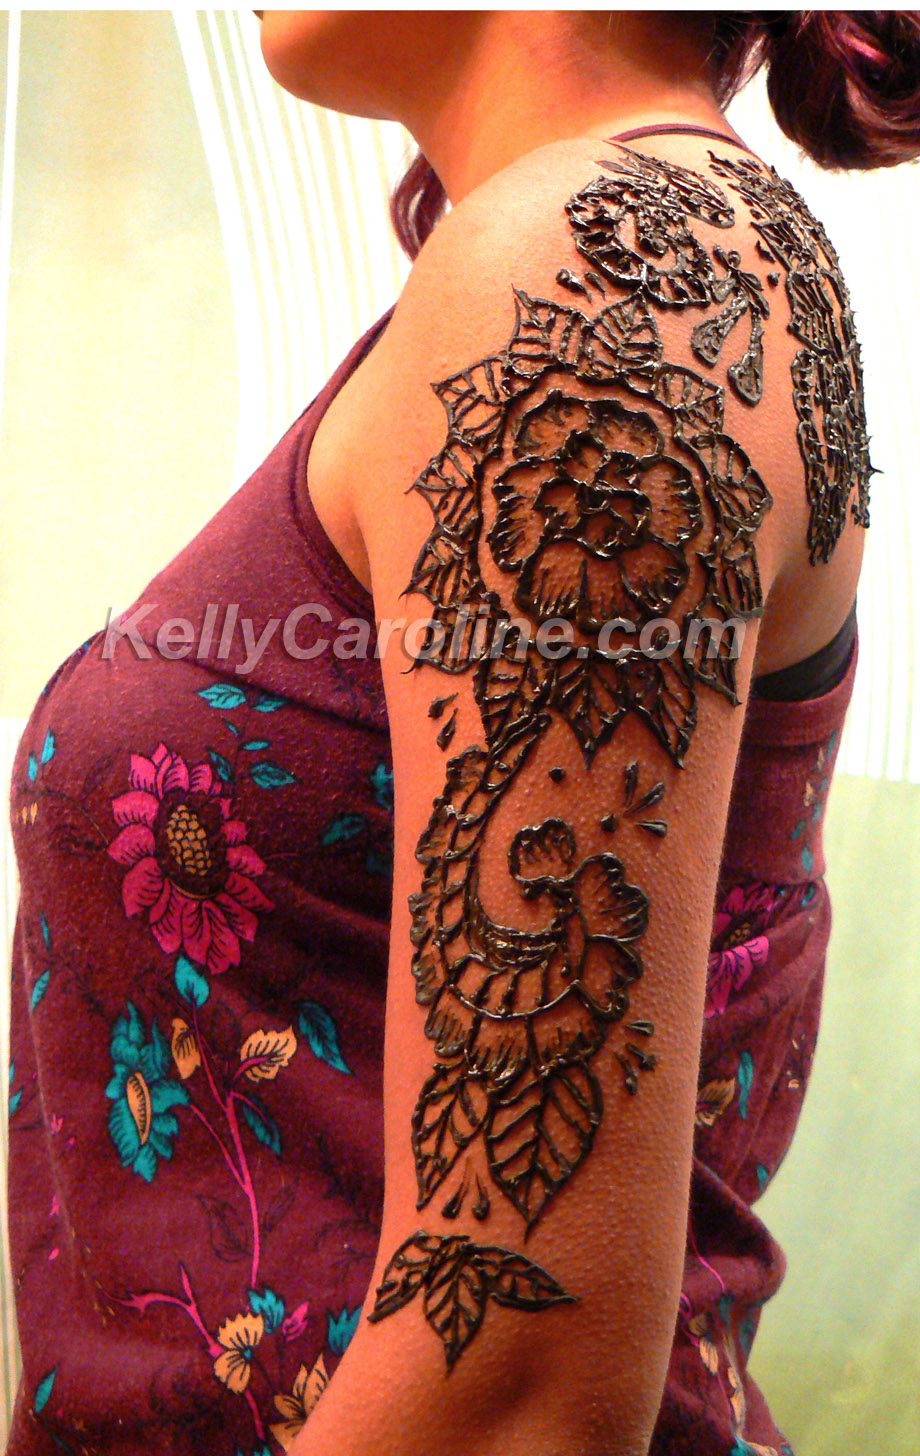 Woman with henna tattoo on her shoulder Stock Photo by ©nelka7812 156783266